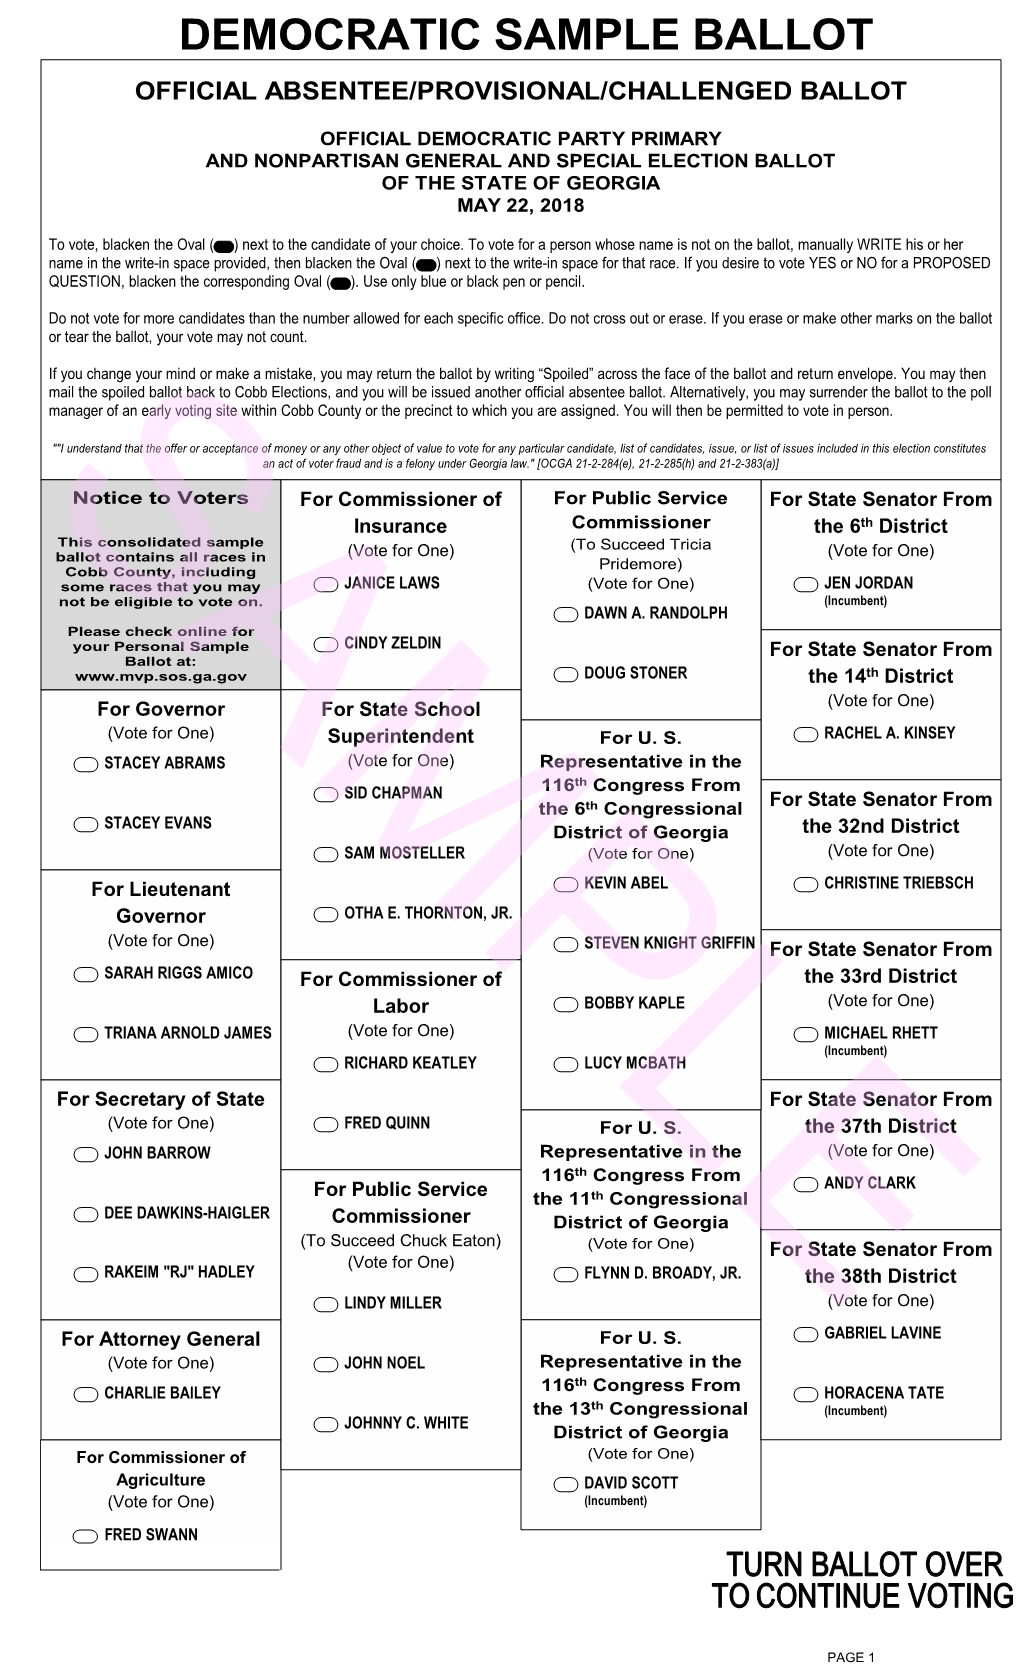 Democratic Sample Ballot Official Absentee/Provisional/Challenged Ballot